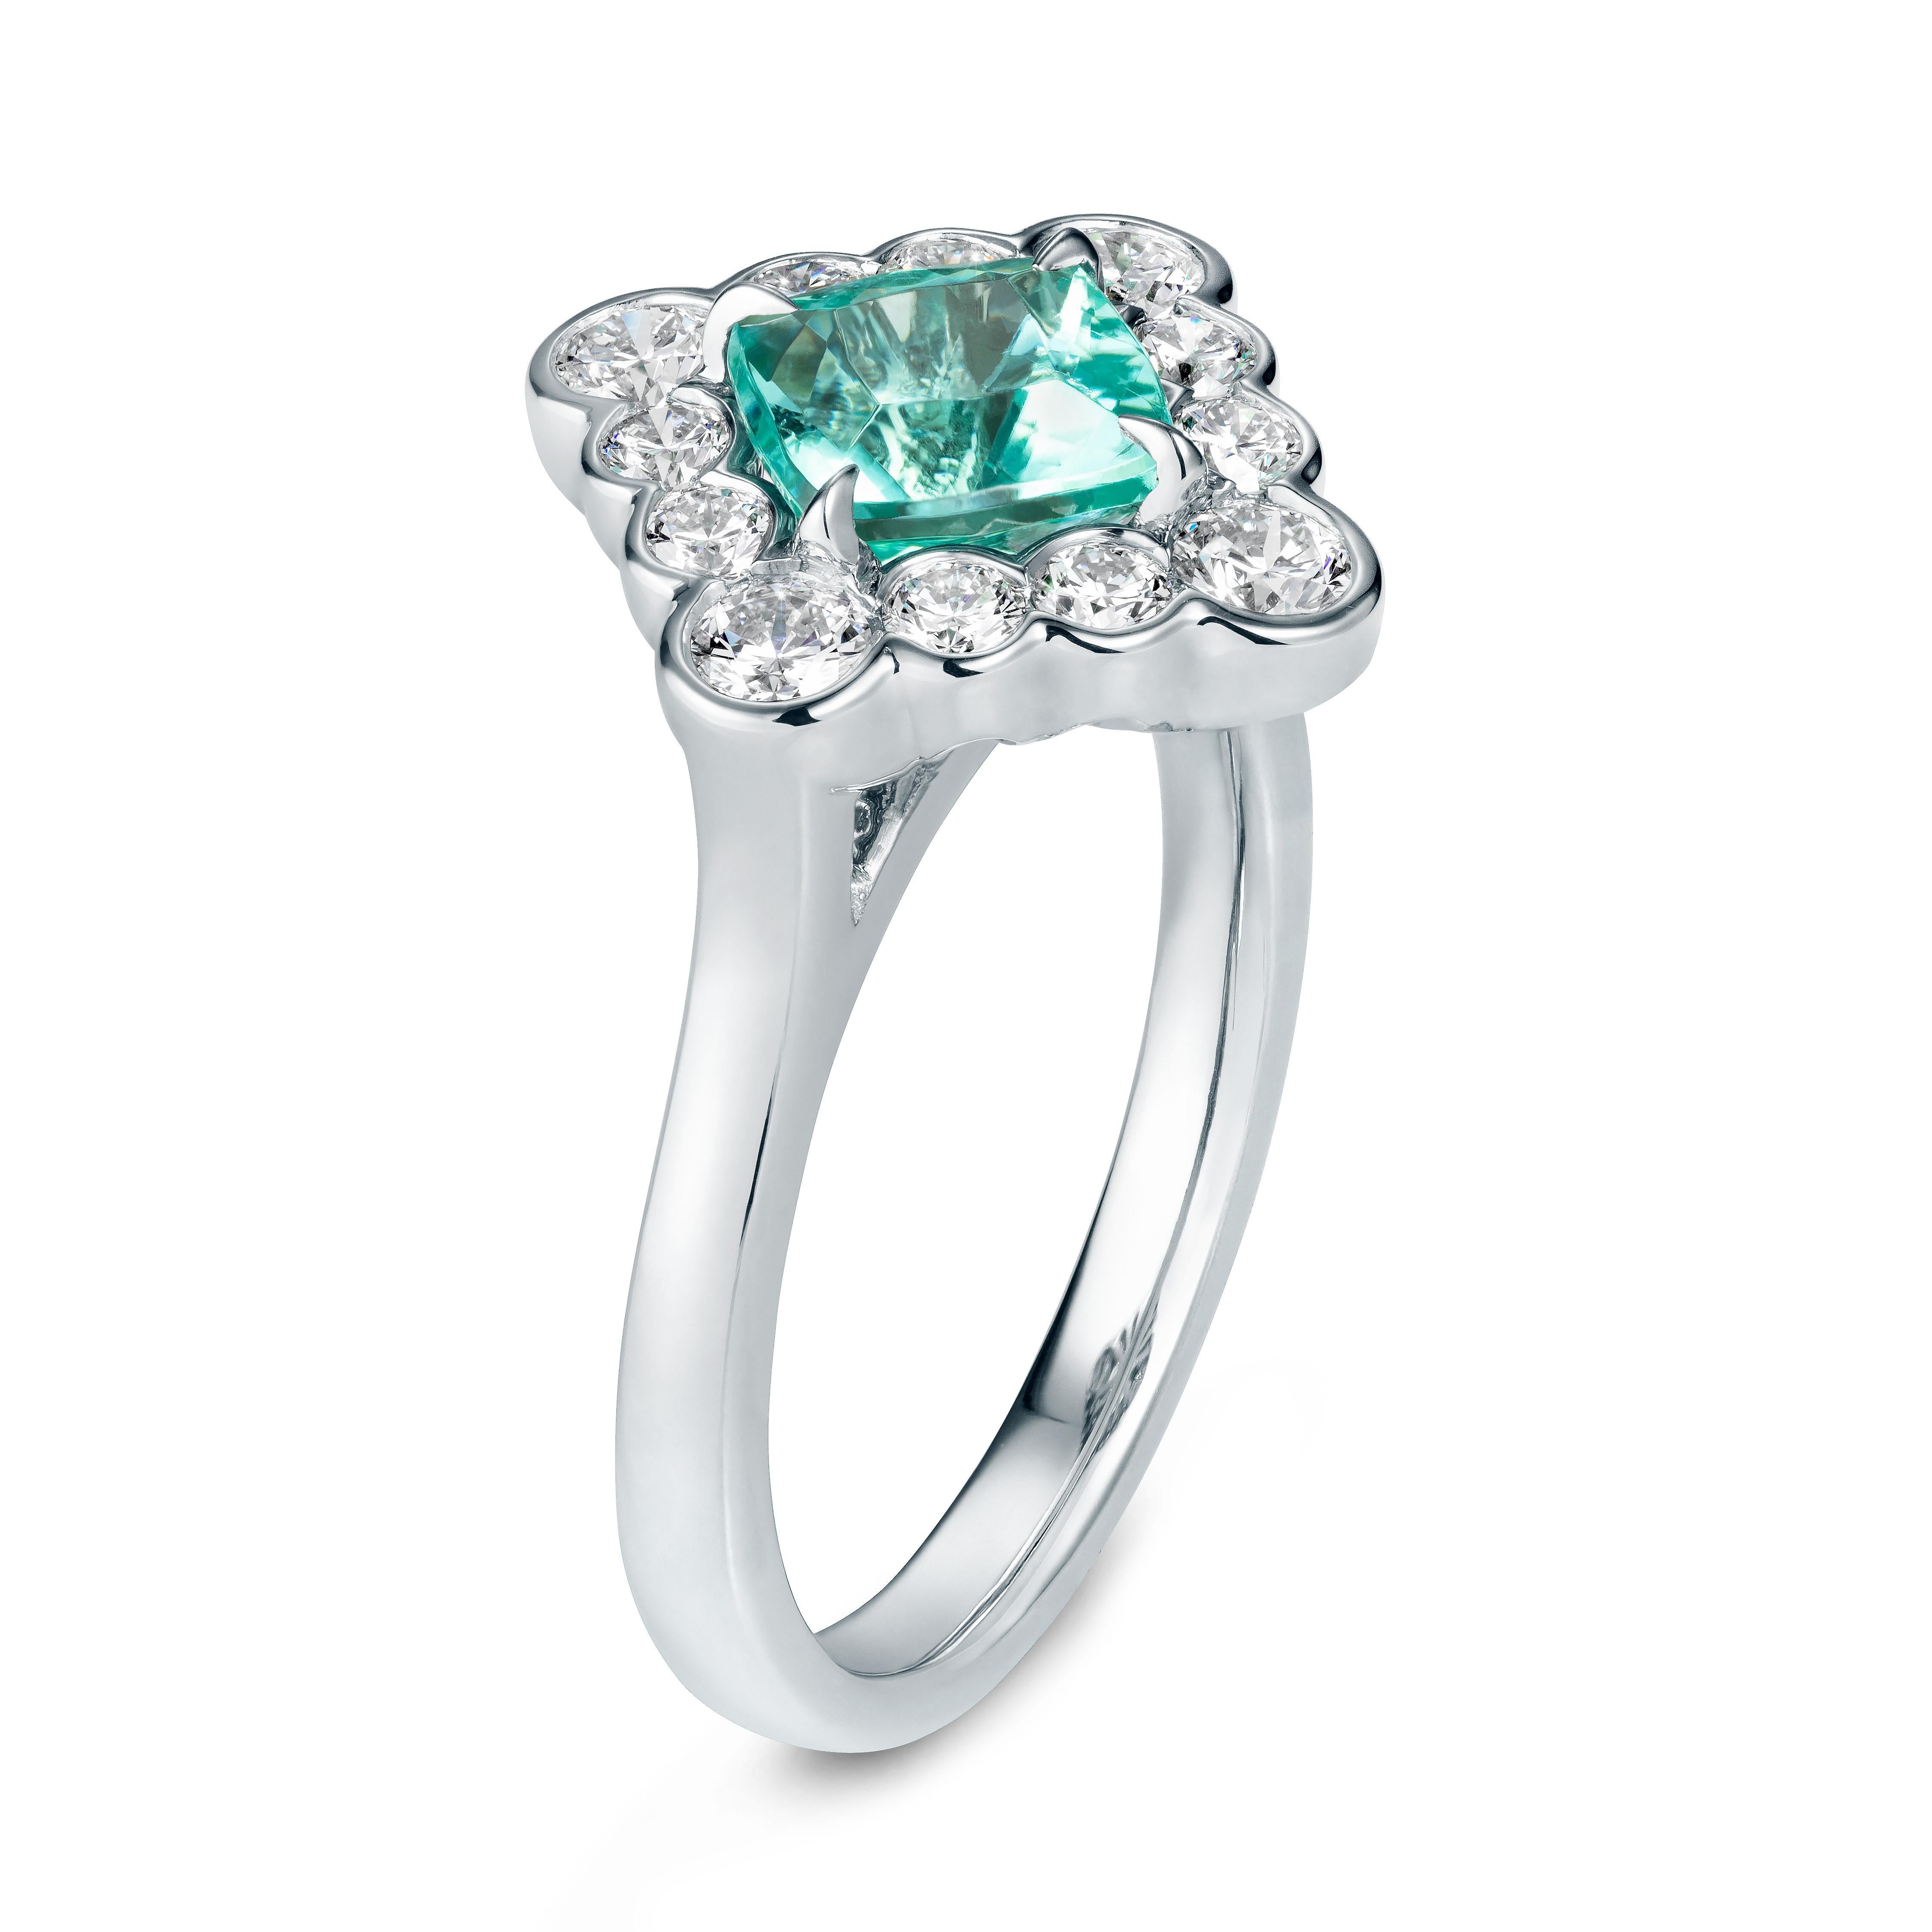 This exceptional piece is a cushion cut paraiba tourmaline diamond engagement ring.  The paraiba centre was sourced from Mozambique.  A paraiba tourmaline piece of jewellery will forever be unique and this wonderful engagement ring is no exception! 